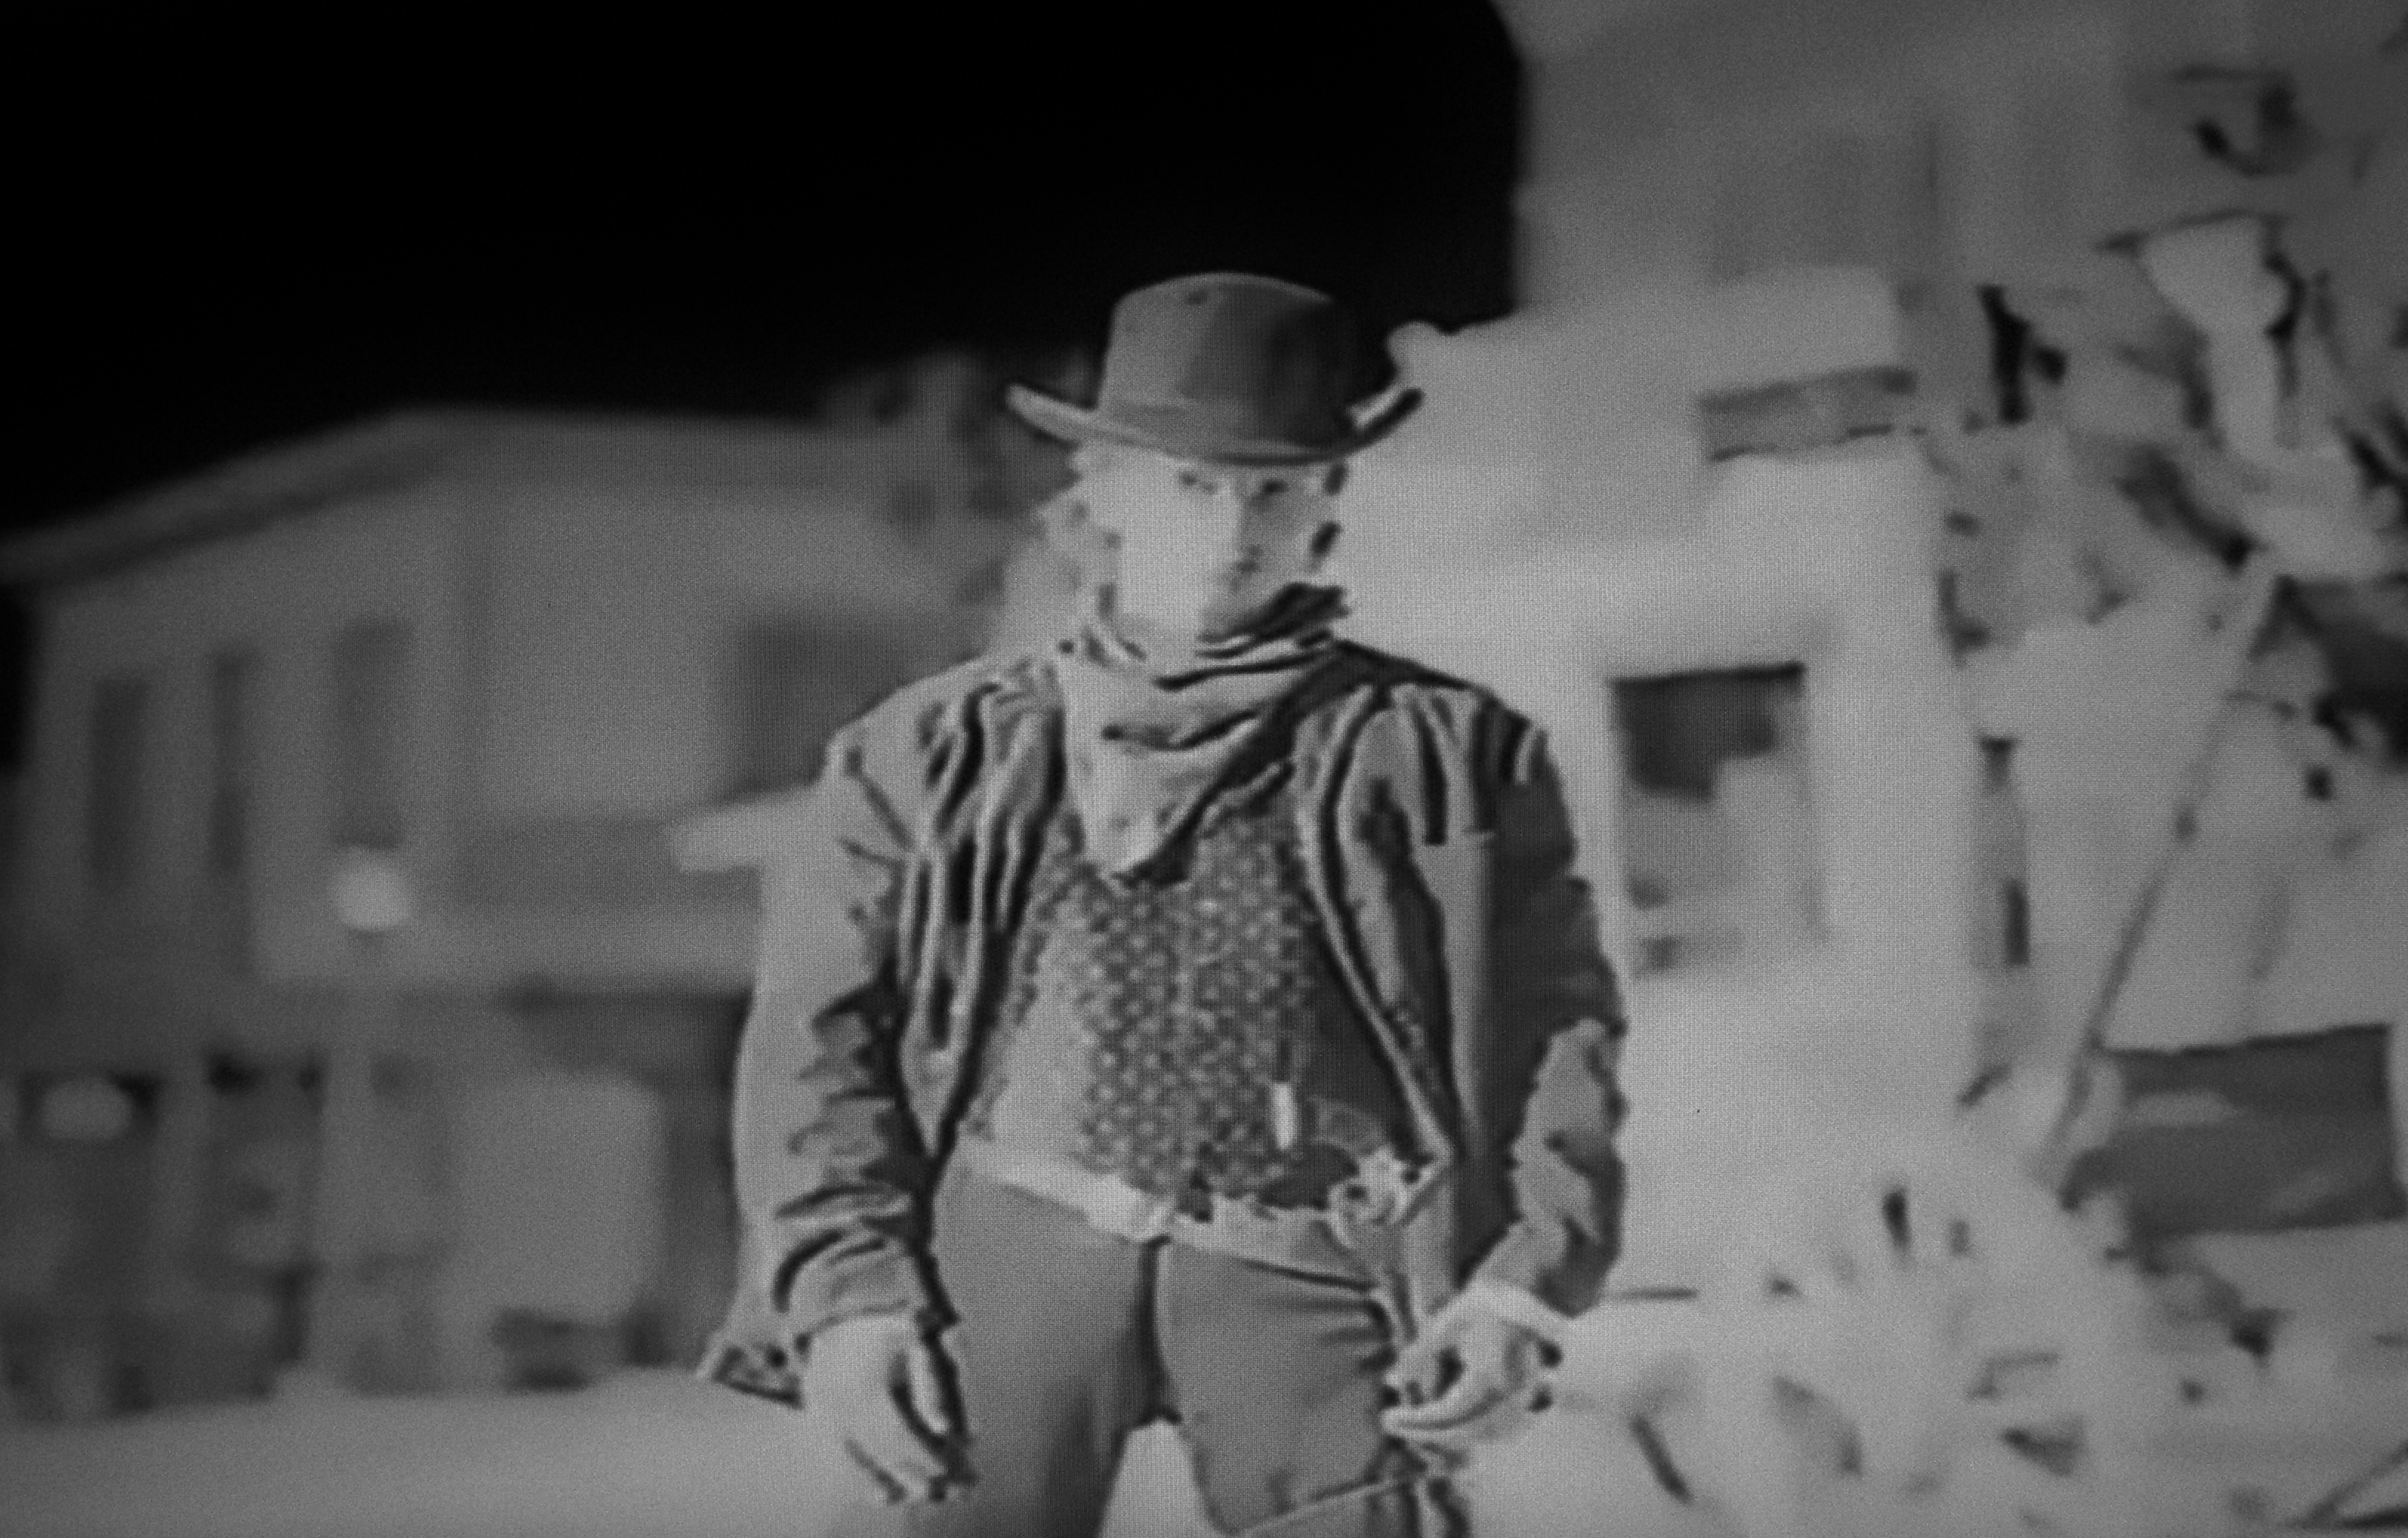 Timemaster as Billy the Kid